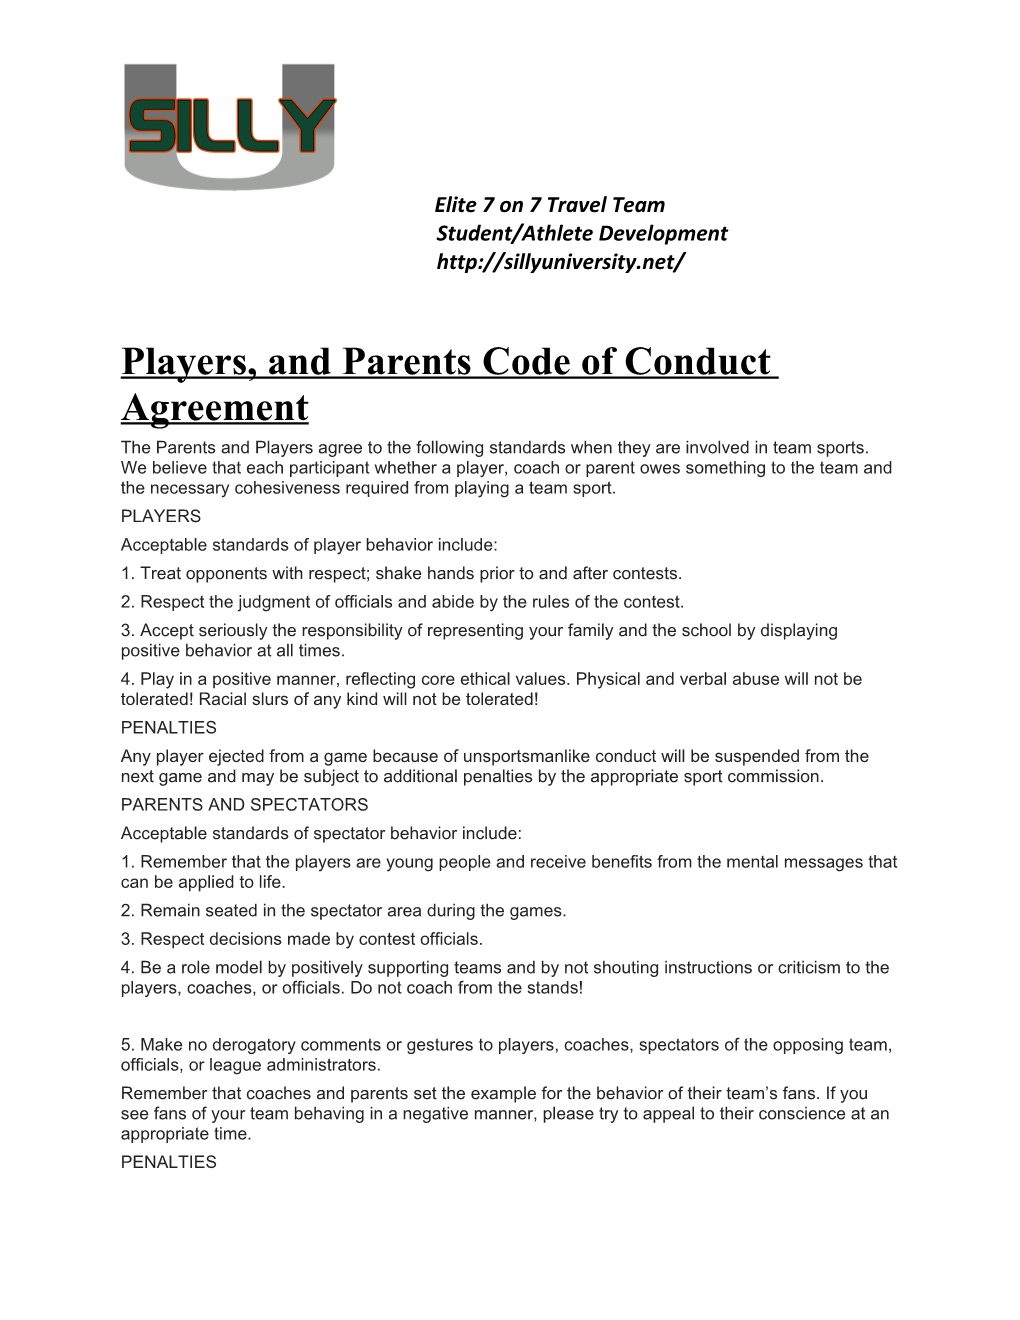 Players, and Parents Code of Conduct Agreement